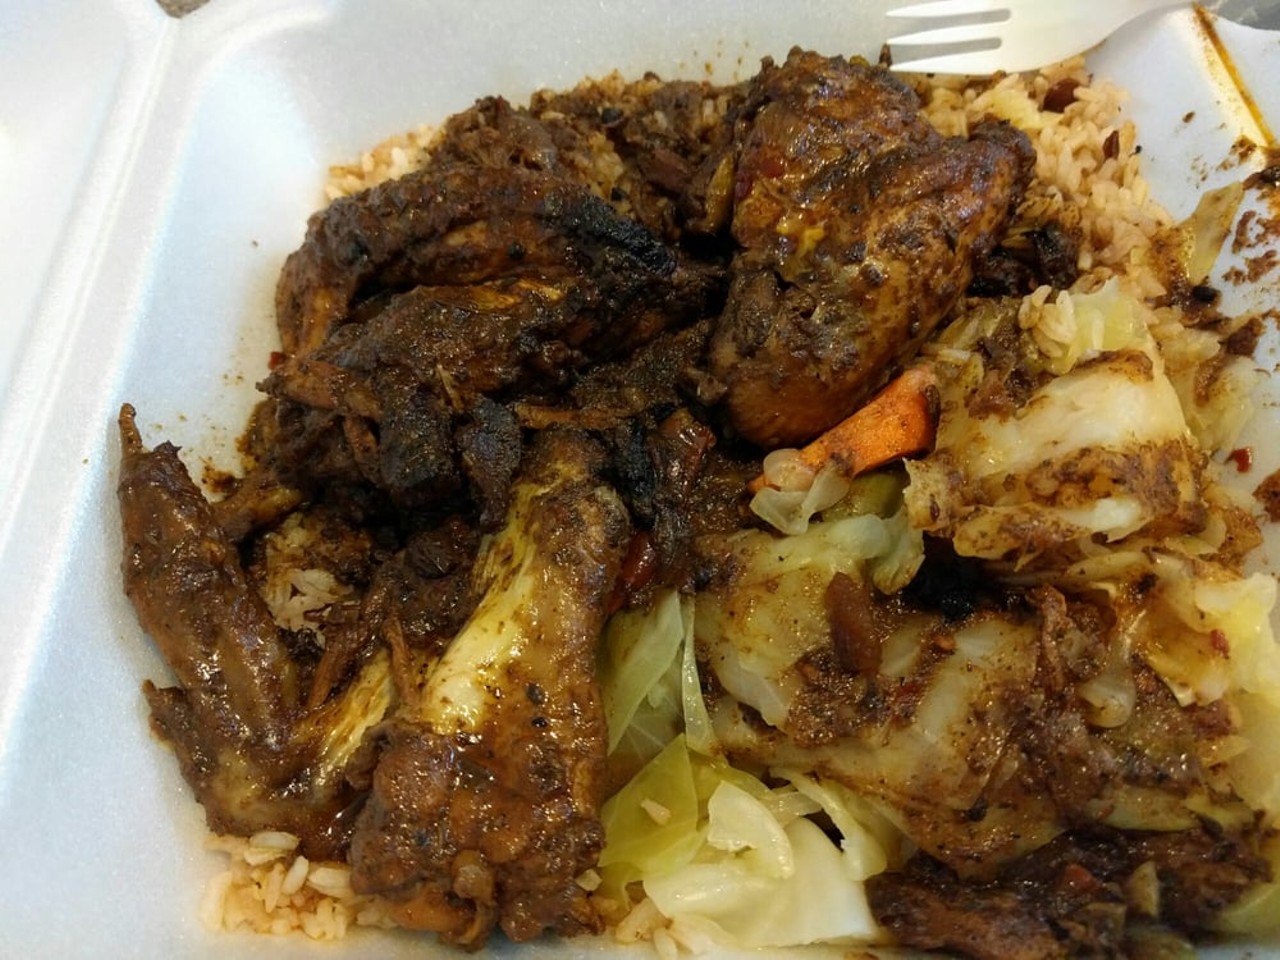 Chicken and cabbage - Island Style, 2144 Noble Rd., 216-851-4500